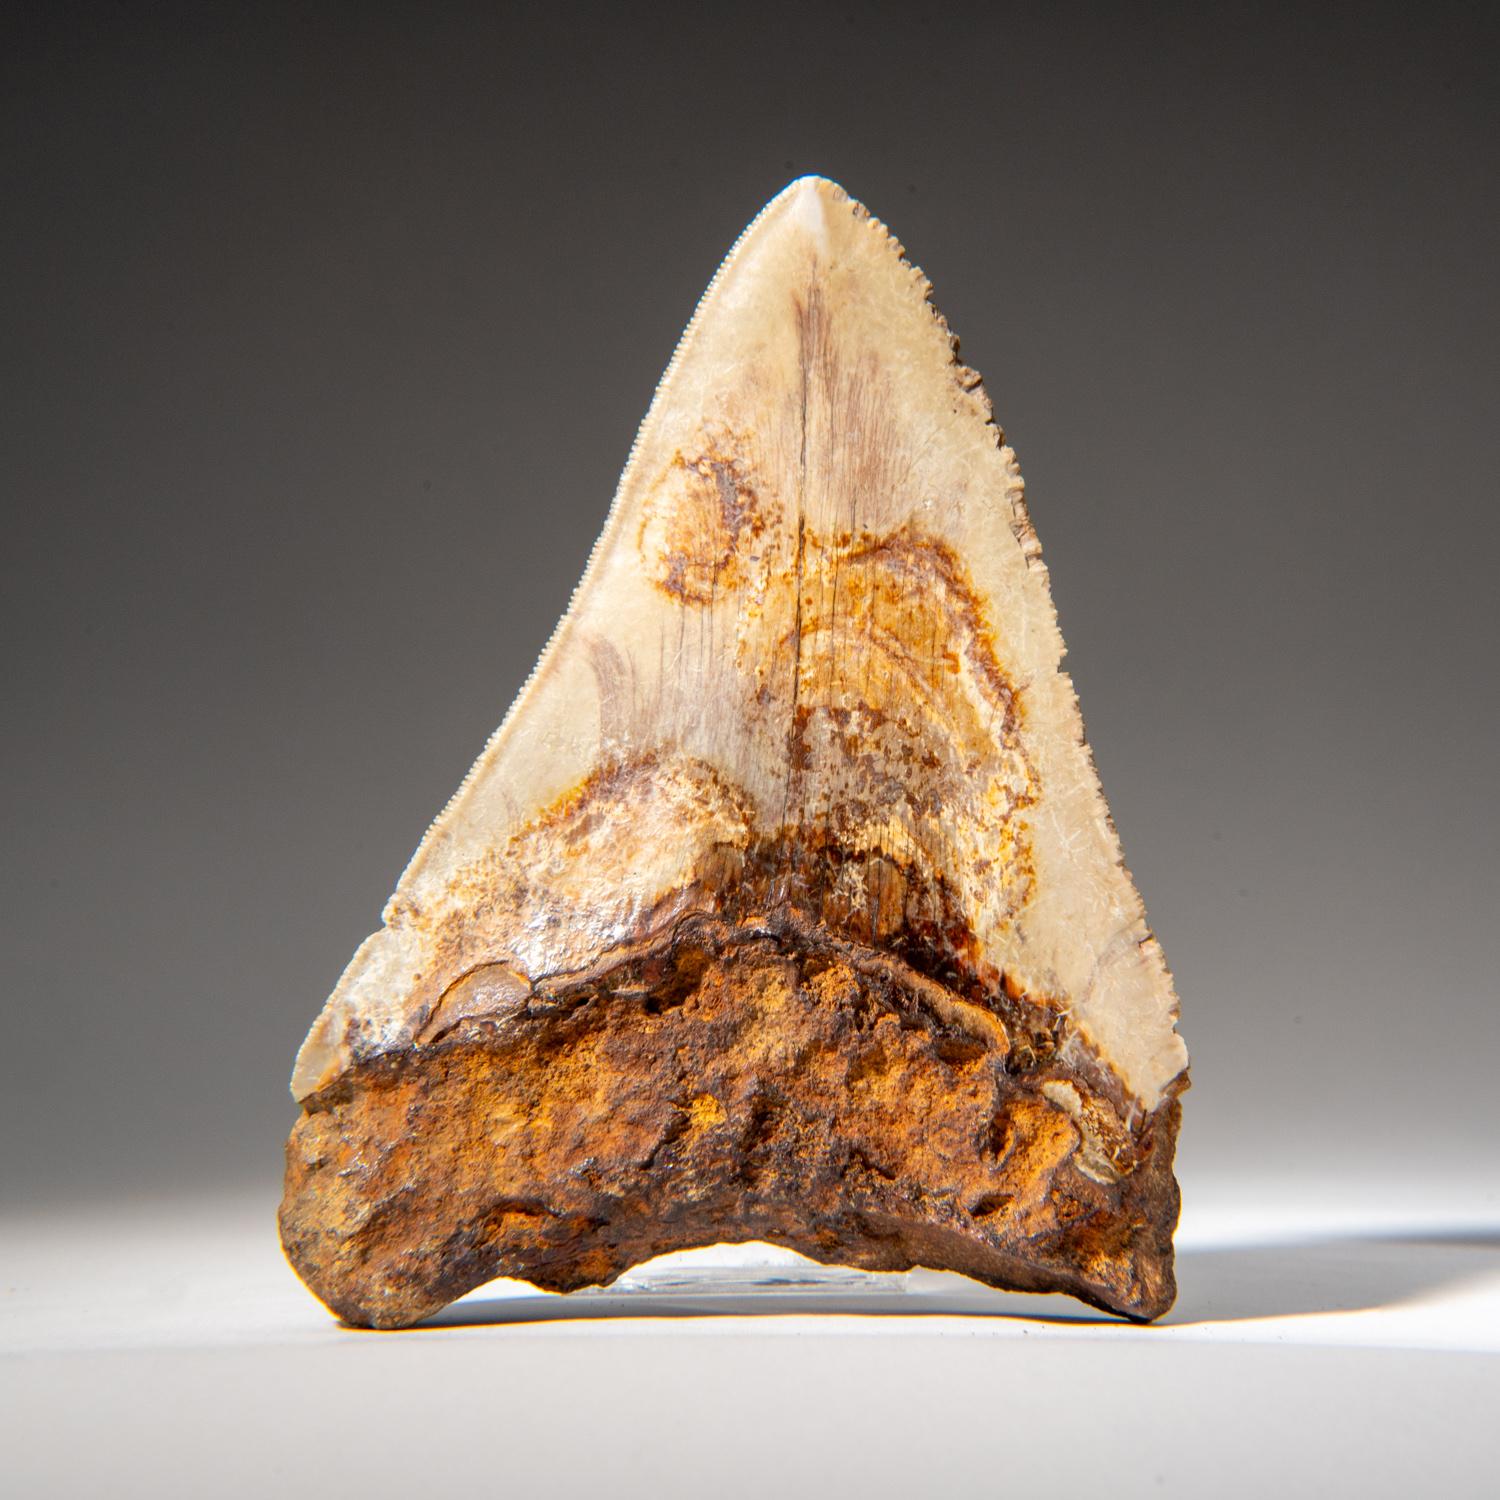 This genuine Megalodon Shark Tooth, sourced by divers in waters off the coast of the Carolinas, is 100% genuine and measures approximately 5